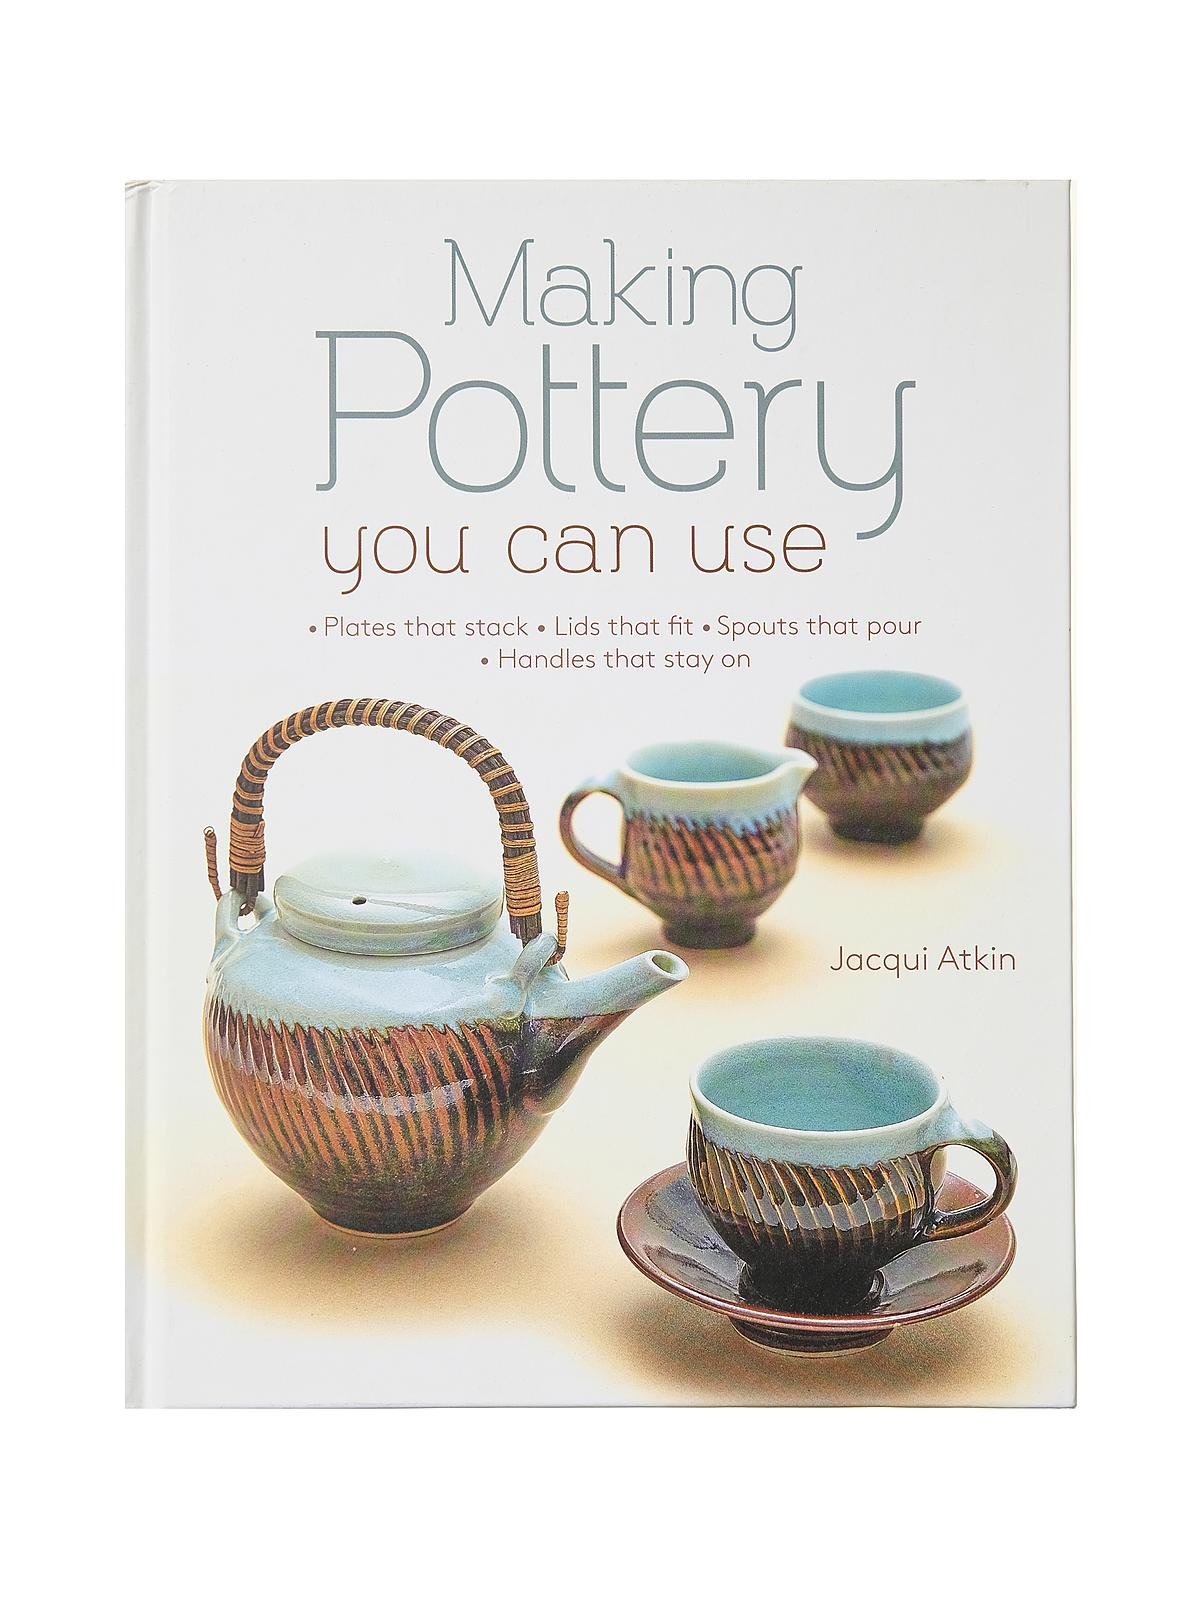 Barron's - Making Pottery You Can Use